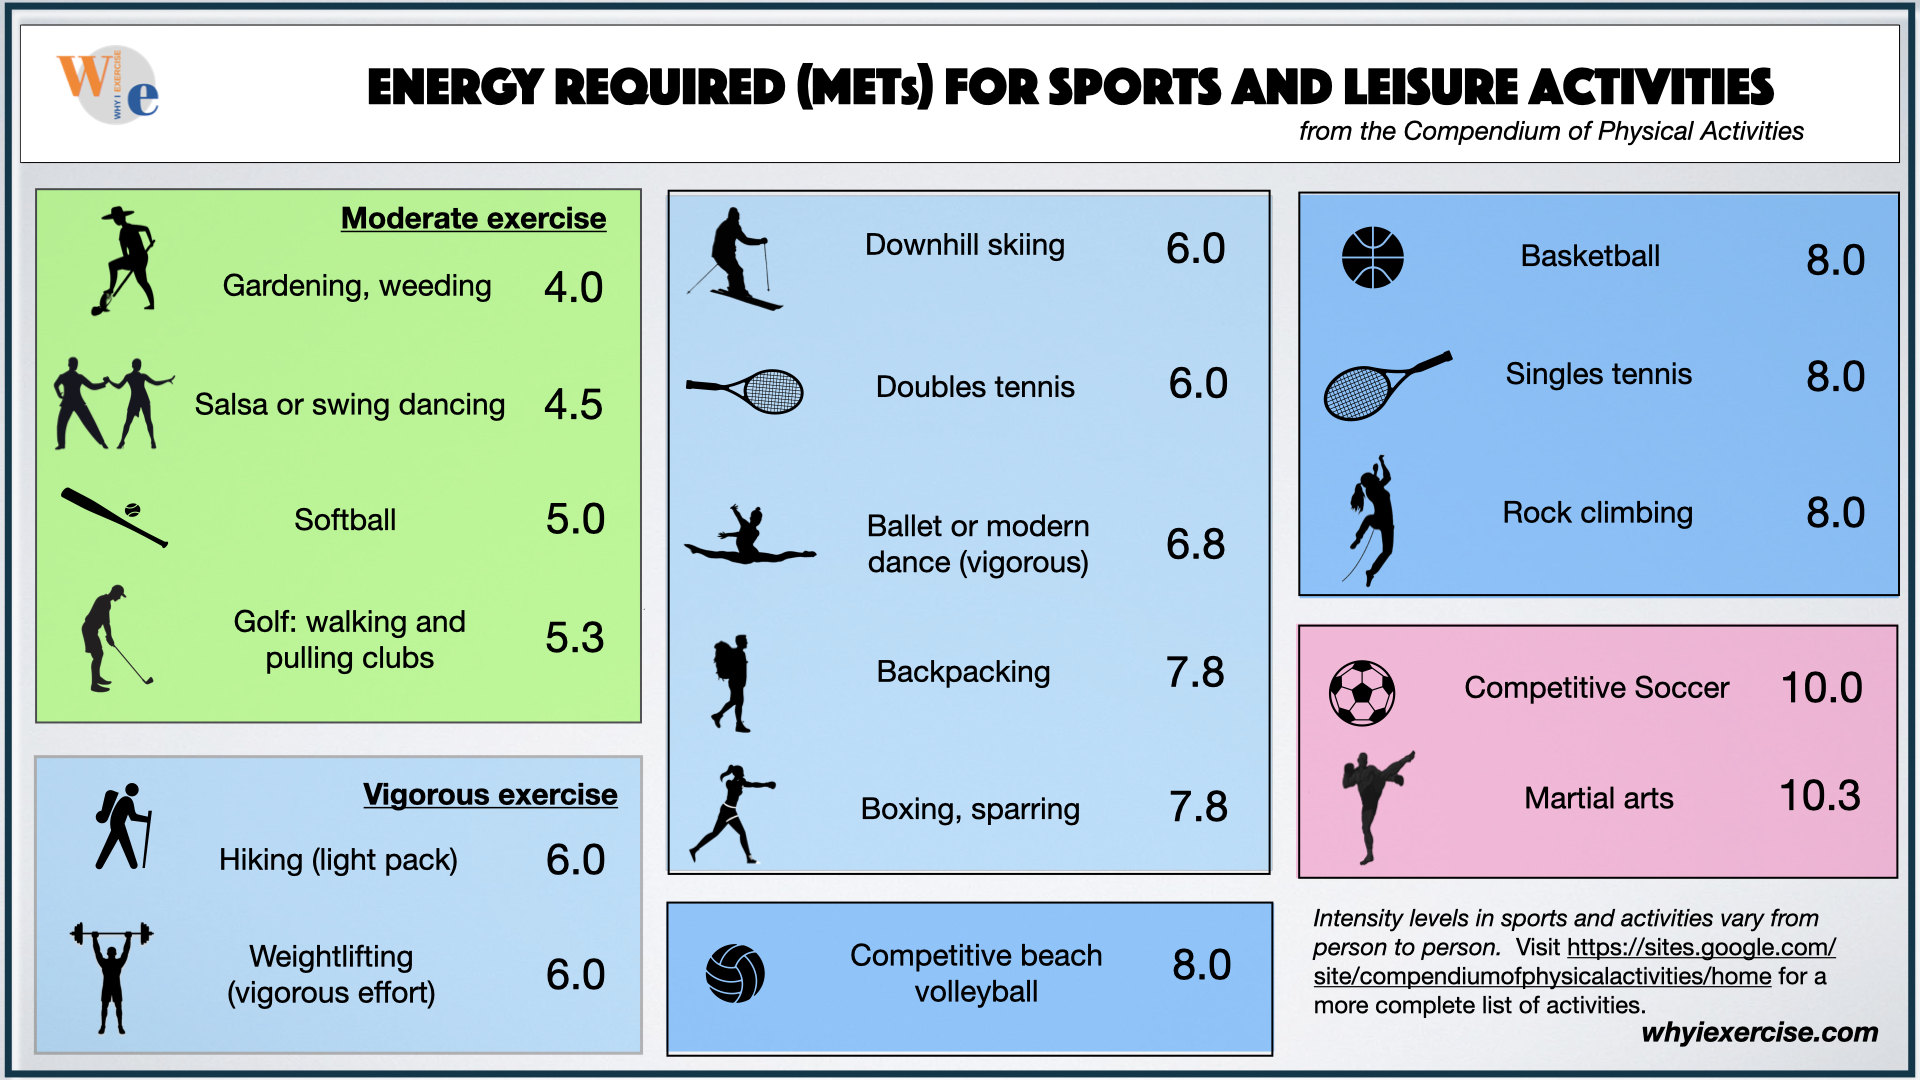 Comparison of METs for sports activities